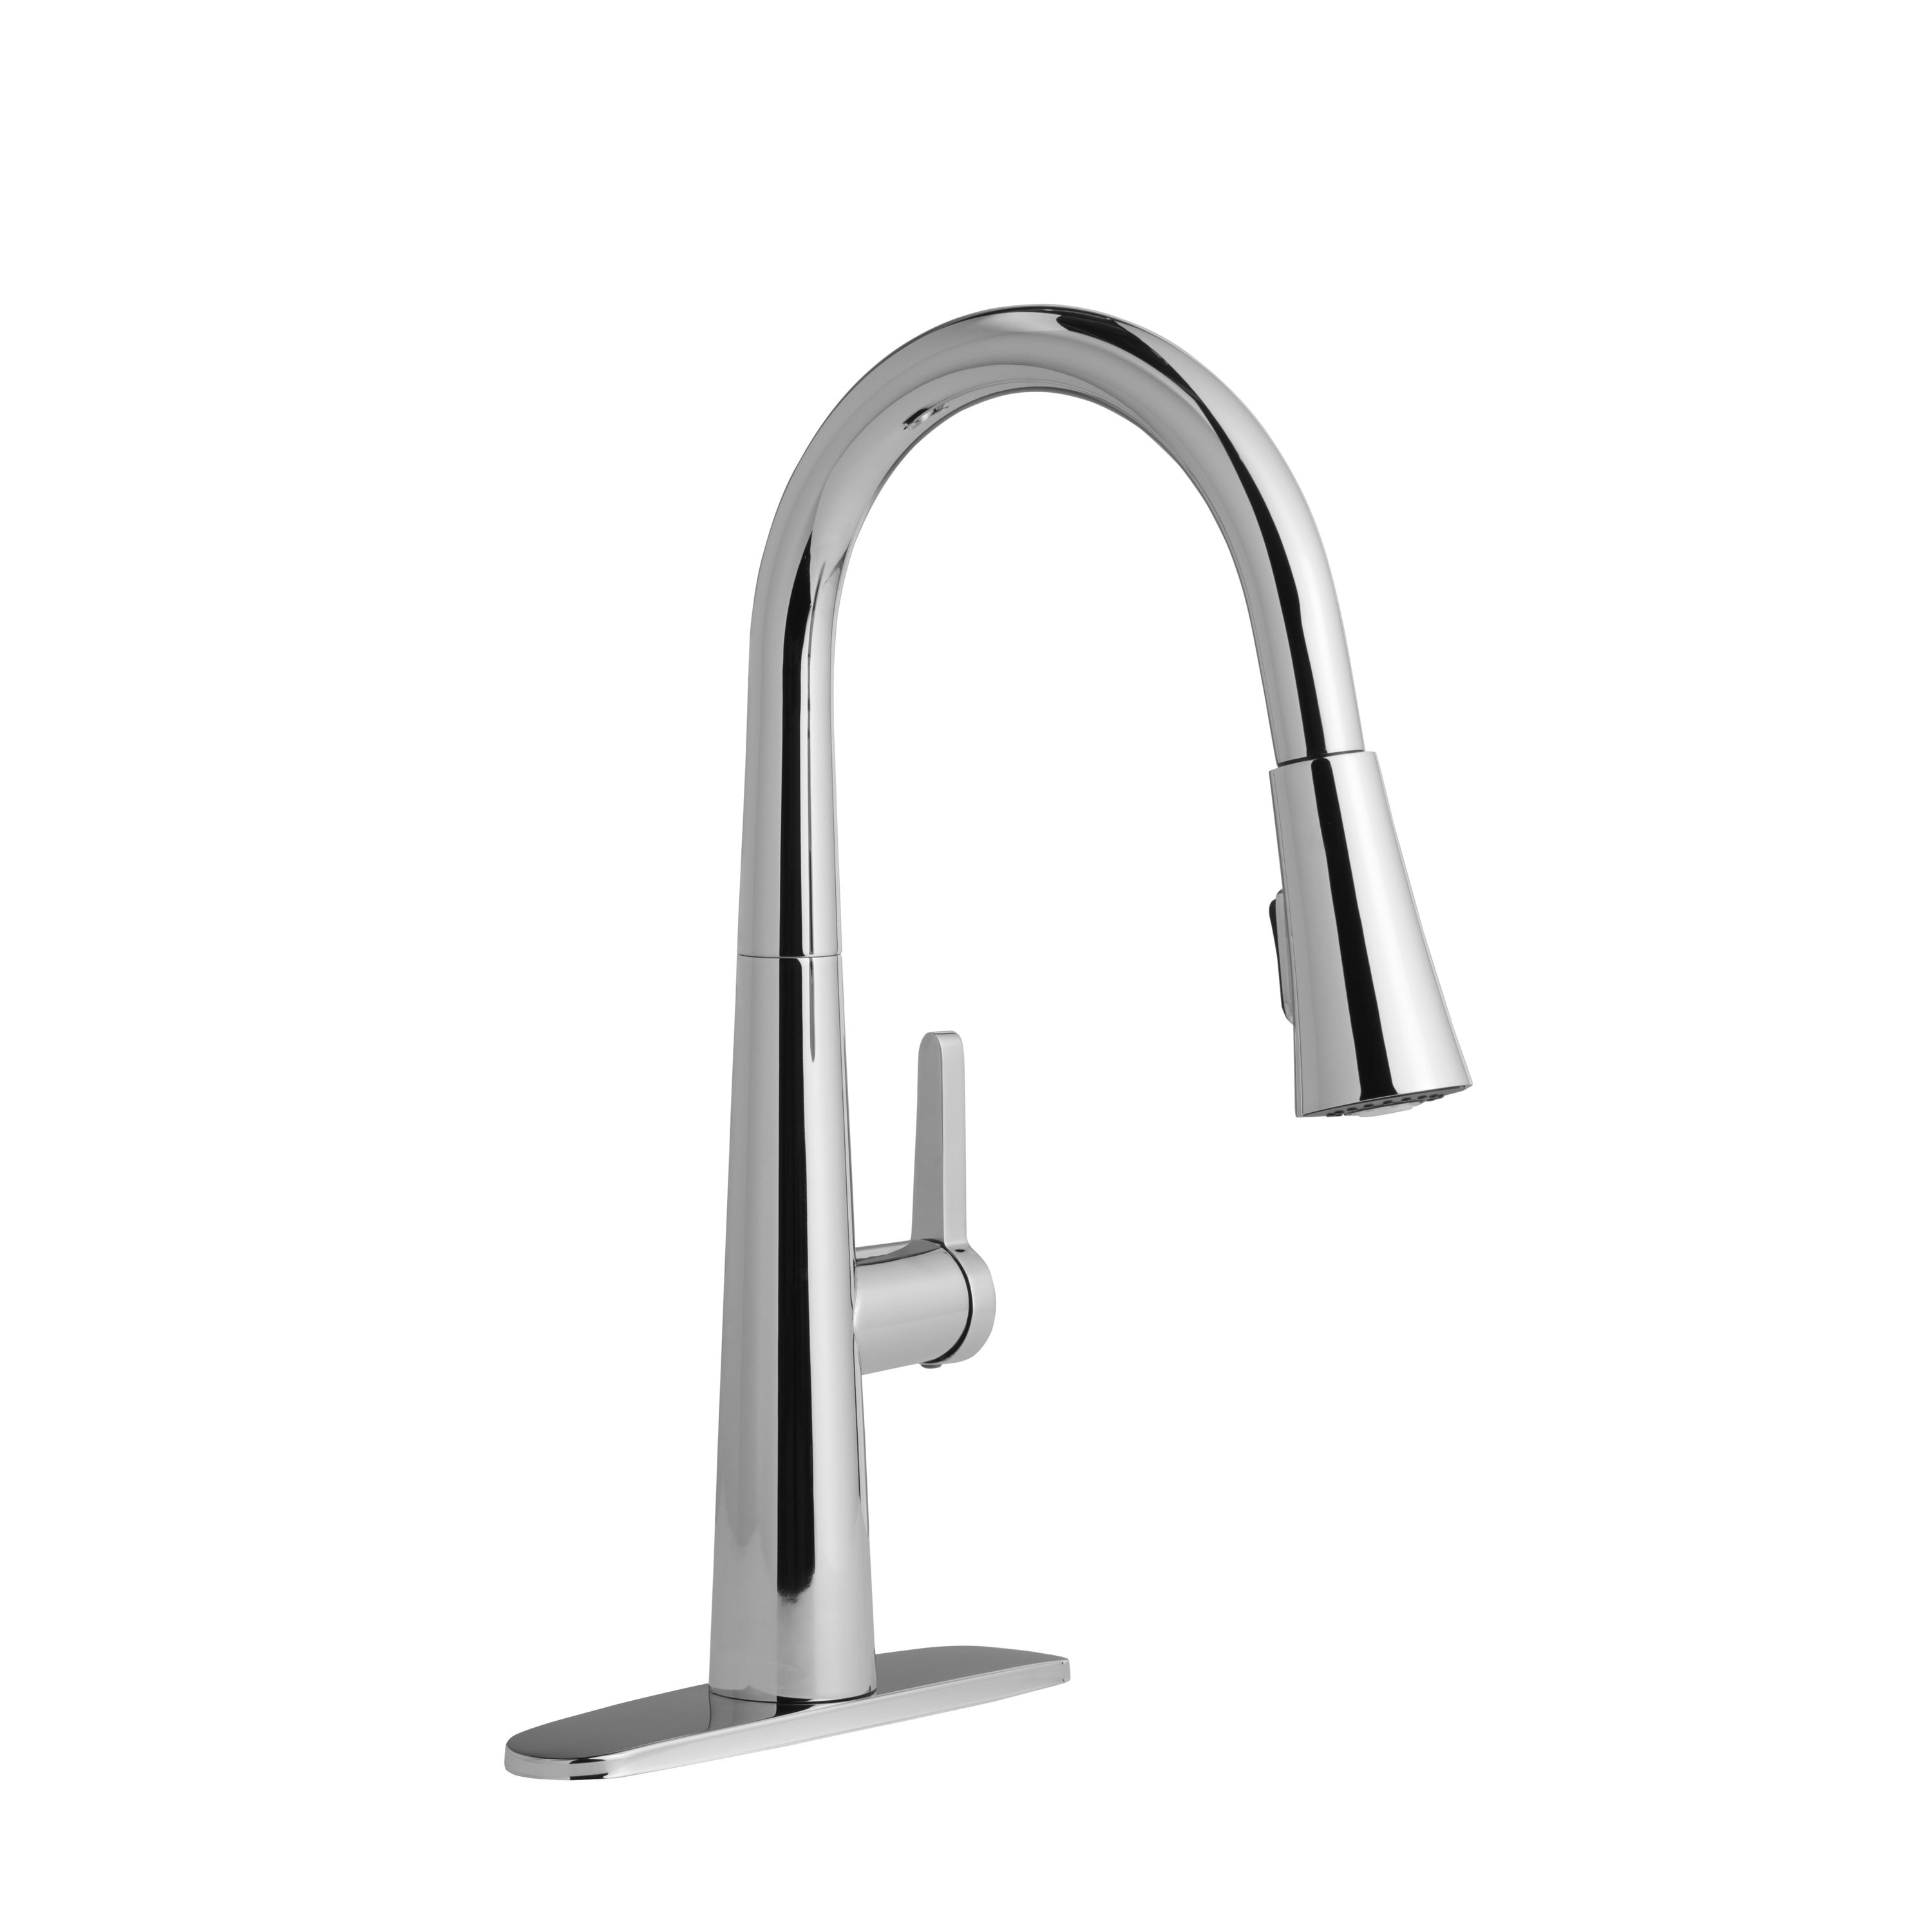 Chrome Pull-down Kitchen Faucets at Lowes.com